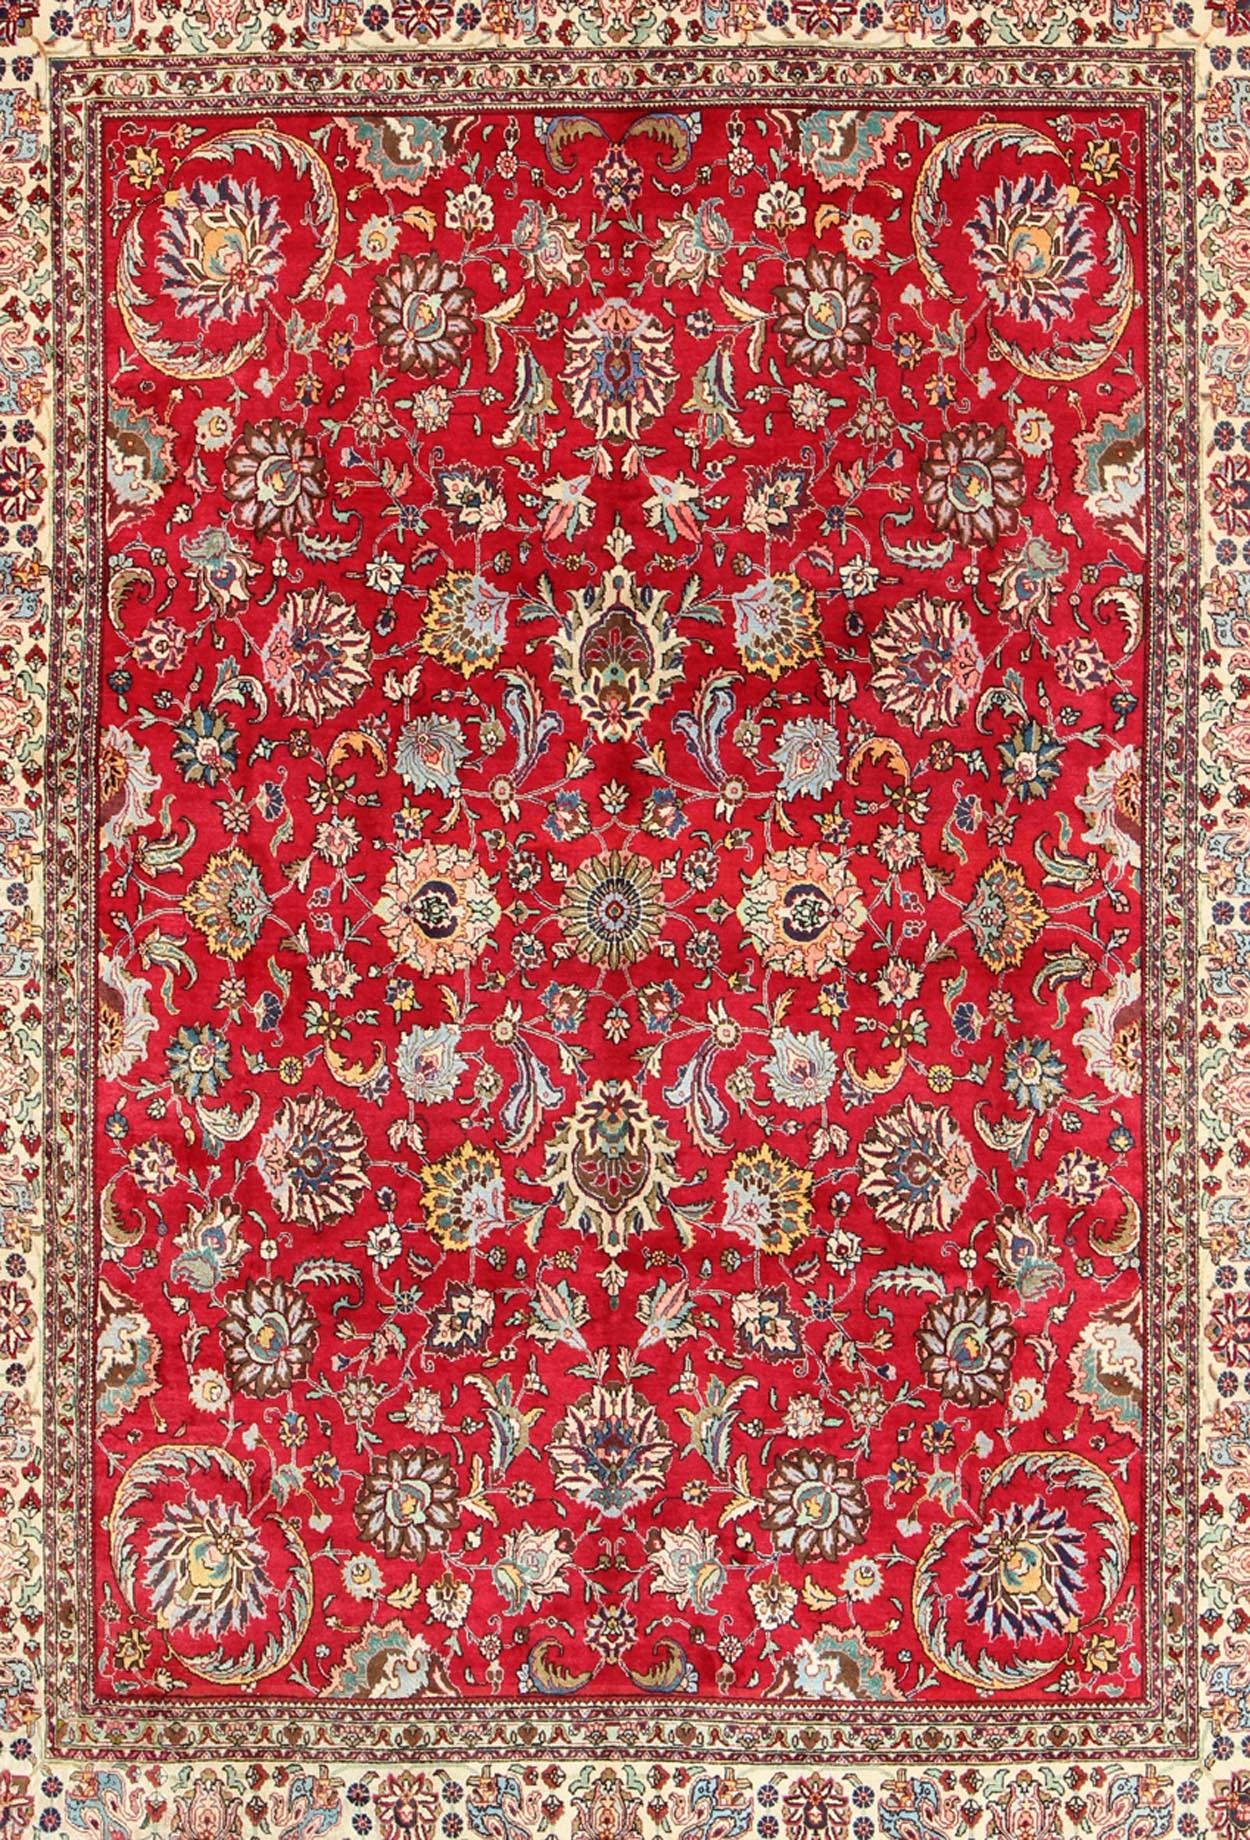 Hand-Knotted Semi Antique Persian Tabriz Rug with All-Over Blossom Design In Red and Ivory  For Sale